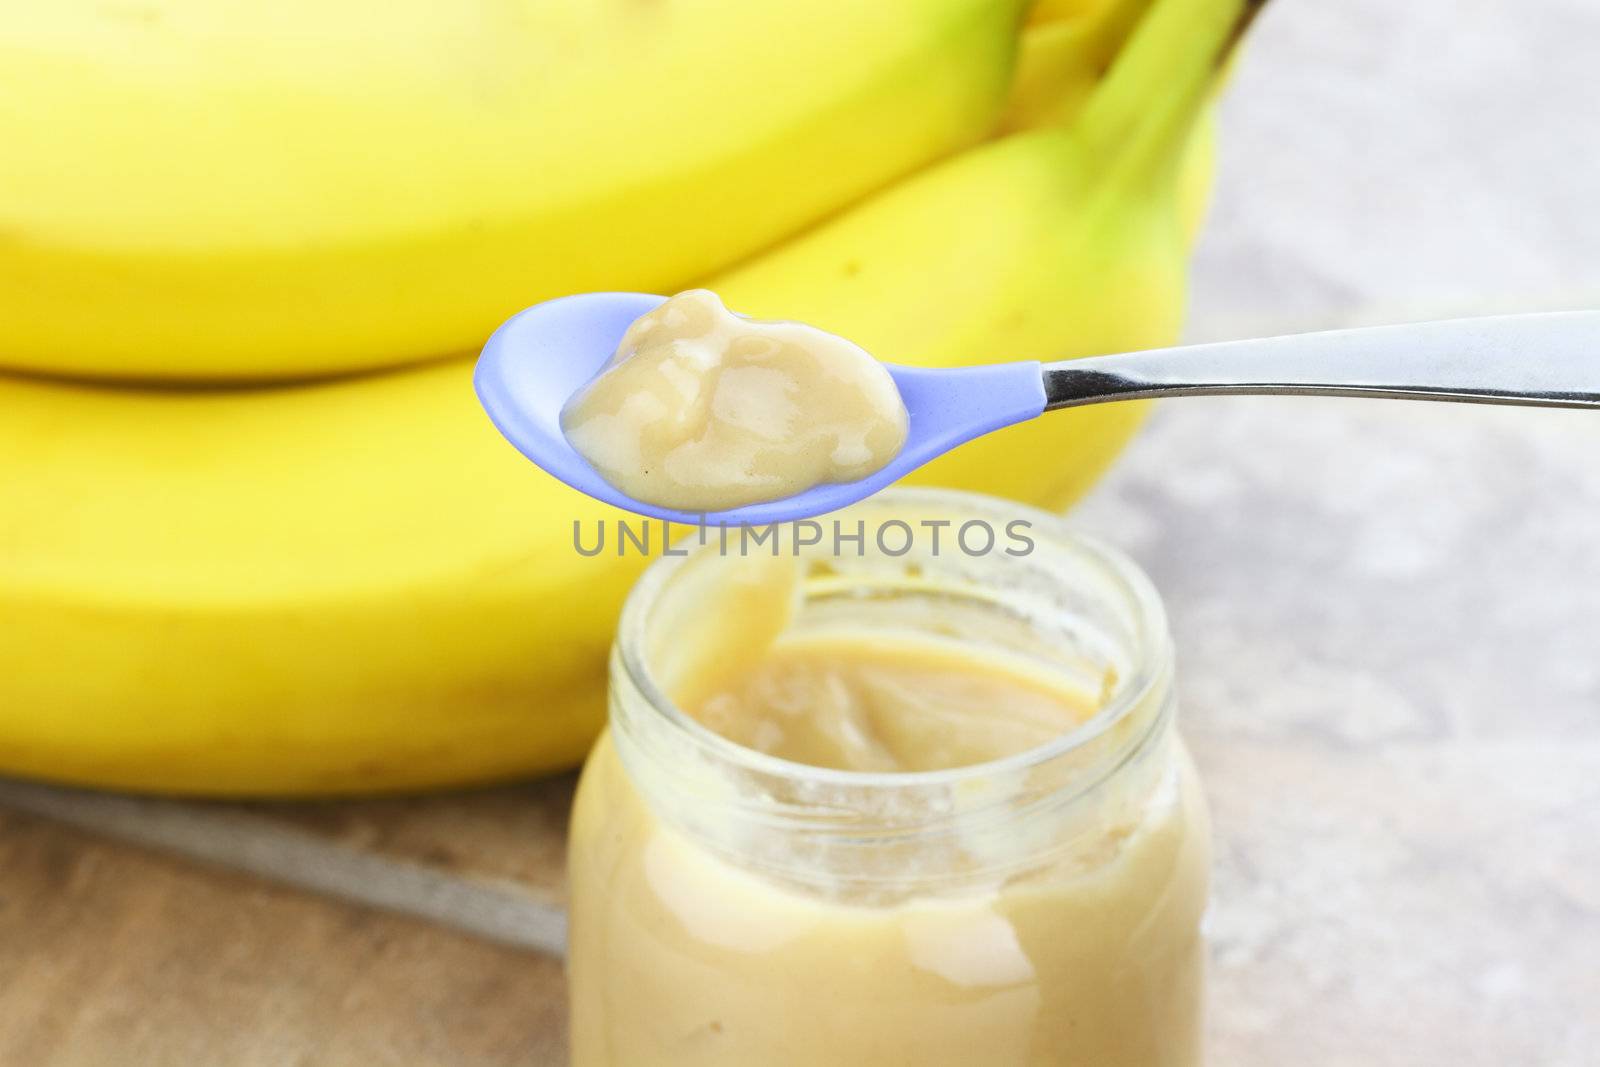 Pureed baby food from a jar with fresh bananas in background.